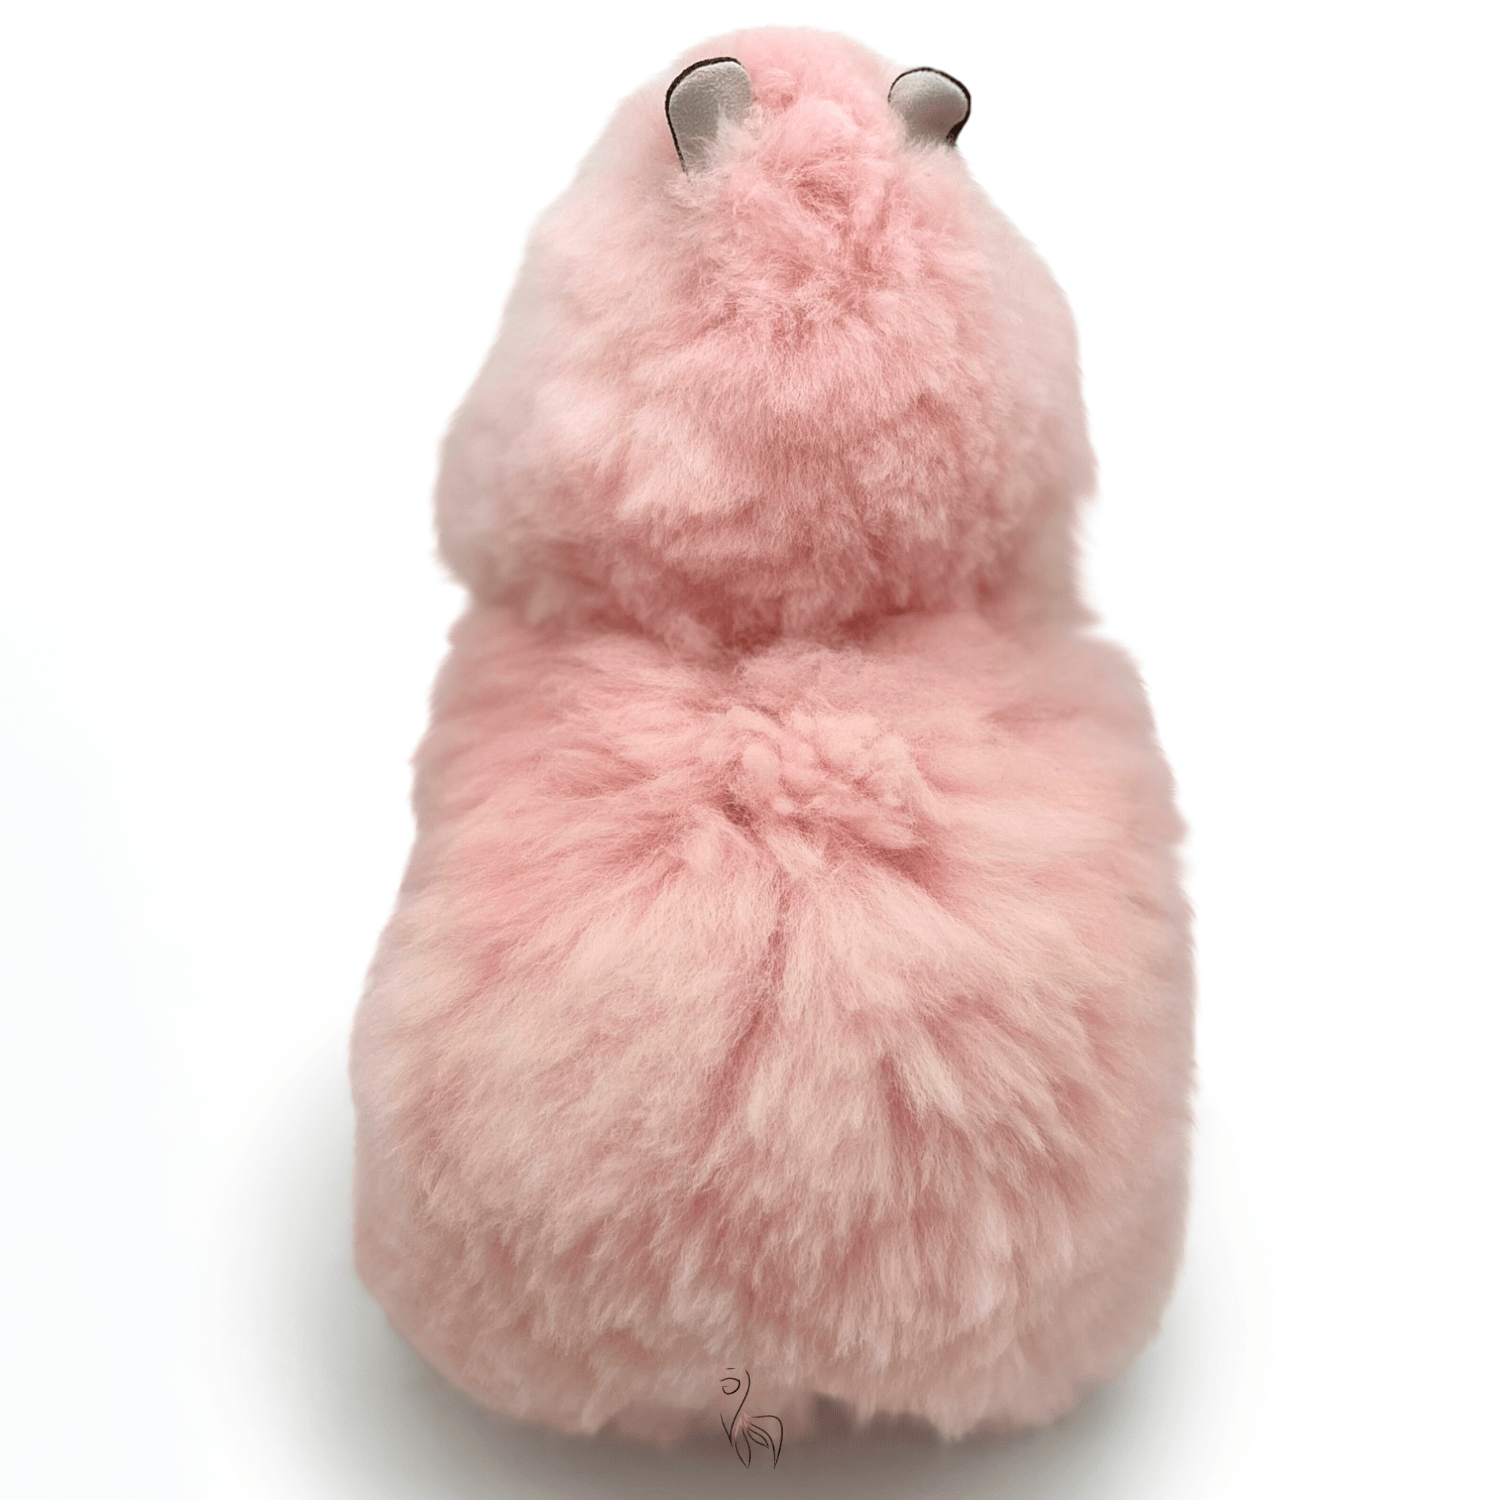 Cotton Candy - Large Alpaca Toy (50cm) - Limited Edition